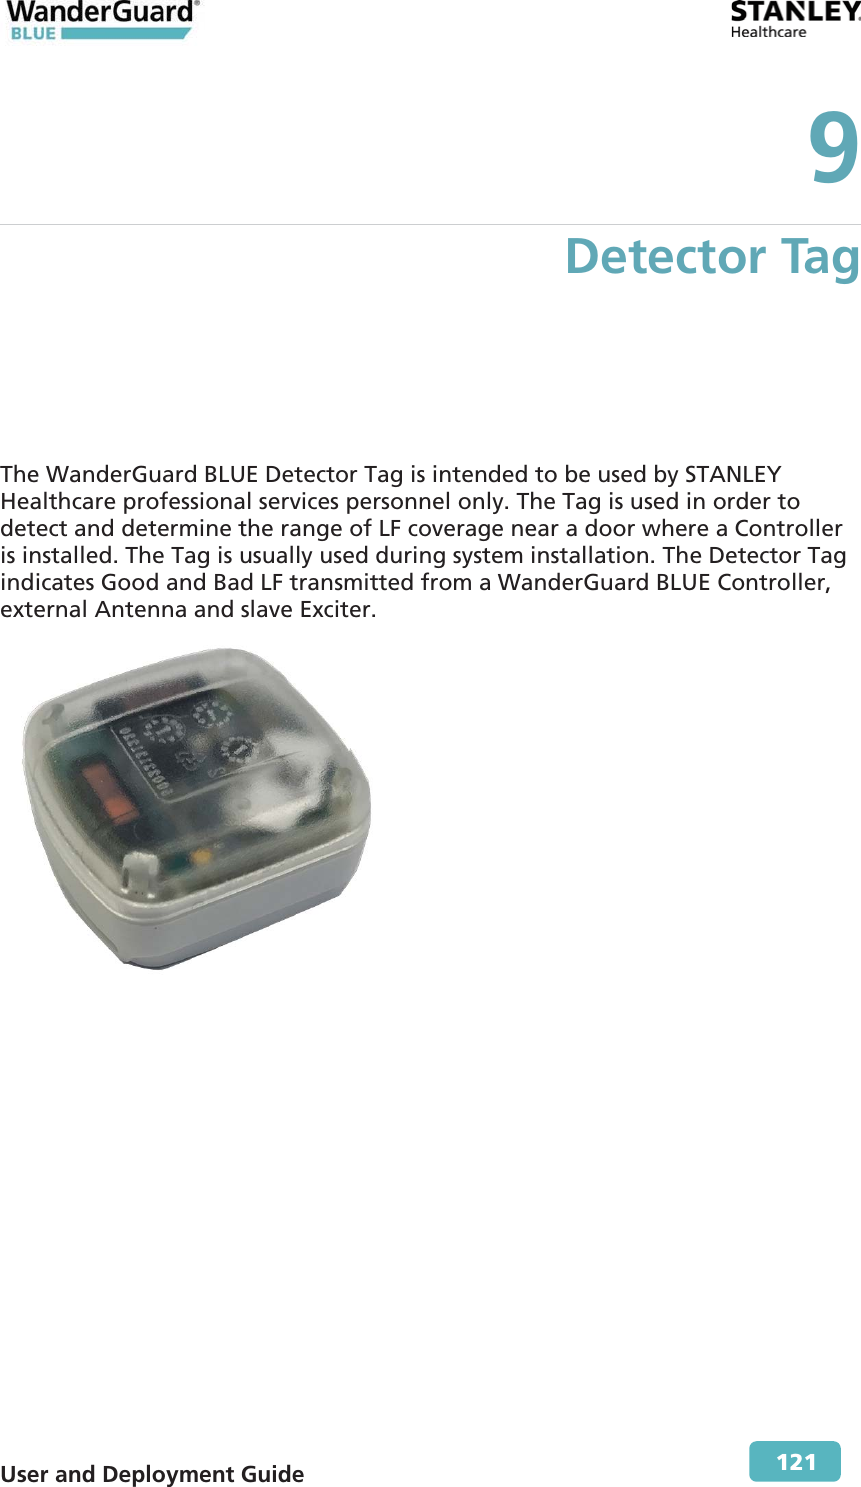  User and Deployment Guide        121 9 Detector Tag The WanderGuard BLUE Detector Tag is intended to be used by STANLEY Healthcare professional services personnel only. The Tag is used in order to detect and determine the range of LF coverage near a door where a Controller is installed. The Tag is usually used during system installation. The Detector Tag indicates Good and Bad LF transmitted from a WanderGuard BLUE Controller, external Antenna and slave Exciter.  